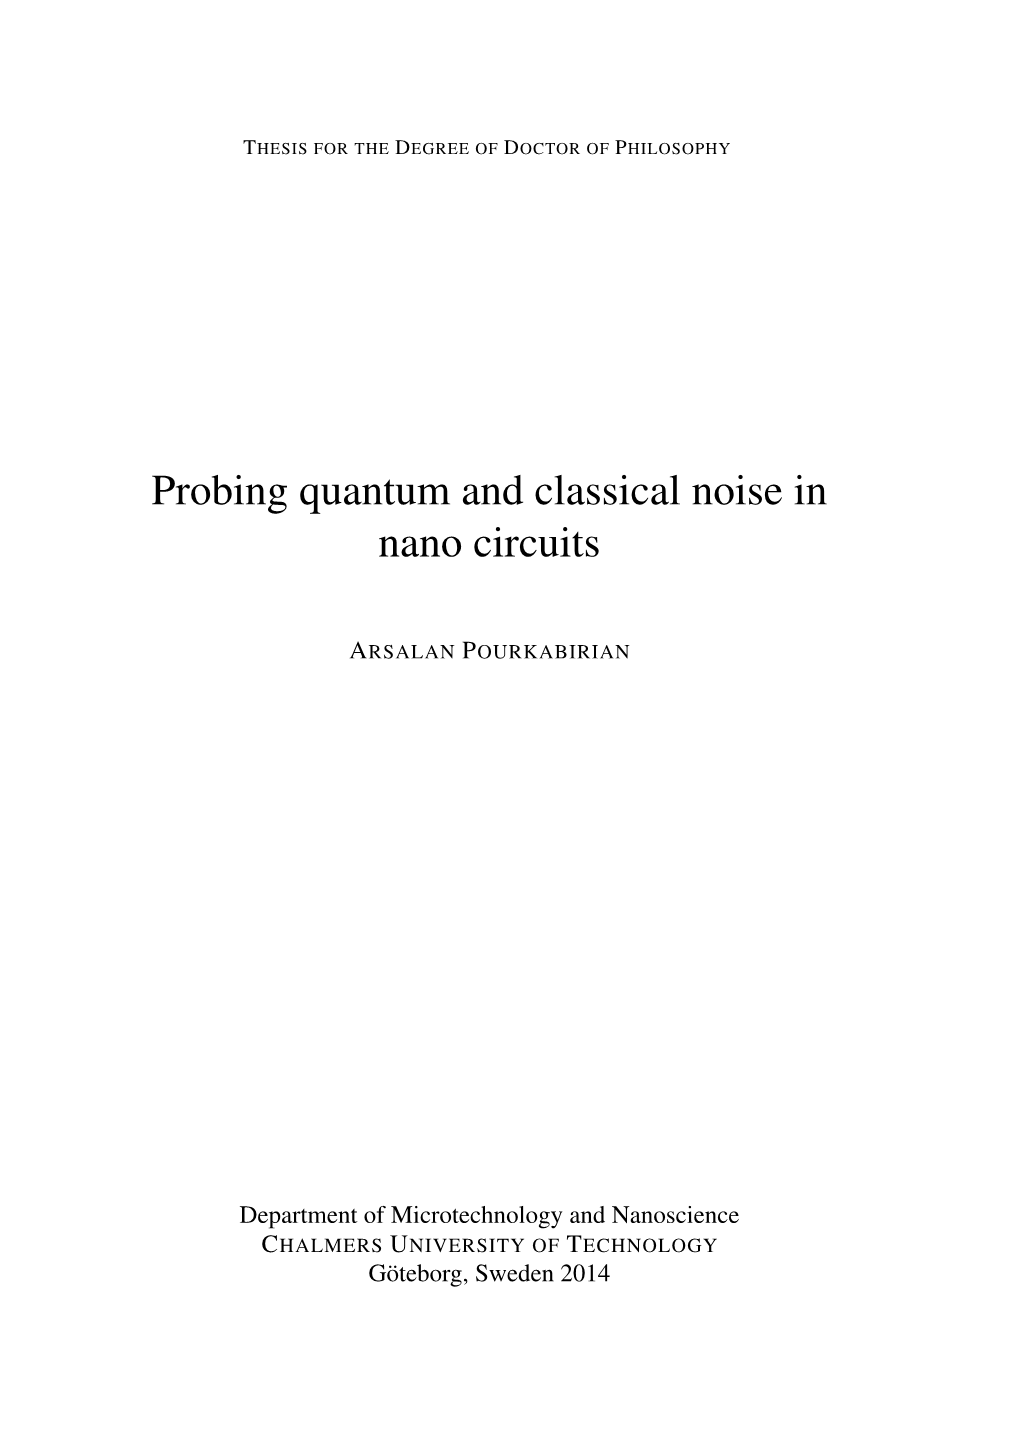 Probing Quantum and Classical Noise in Nano Circuits